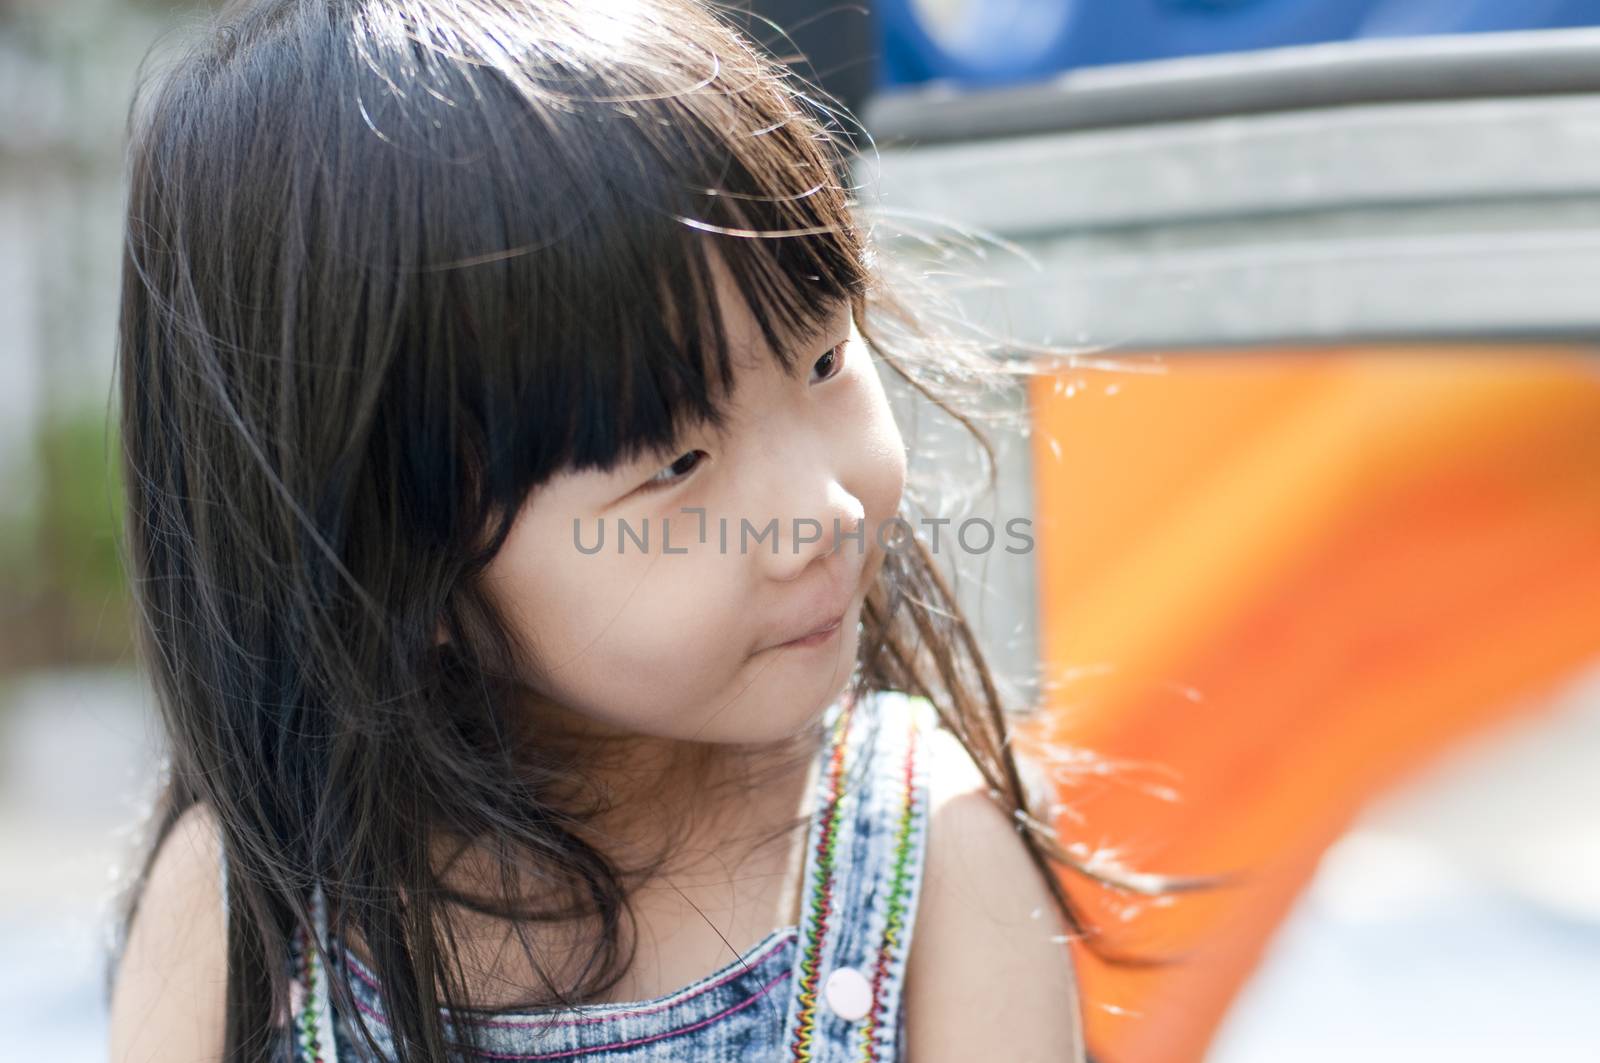 Candid moment of cute little Asian girl having fun in playground.